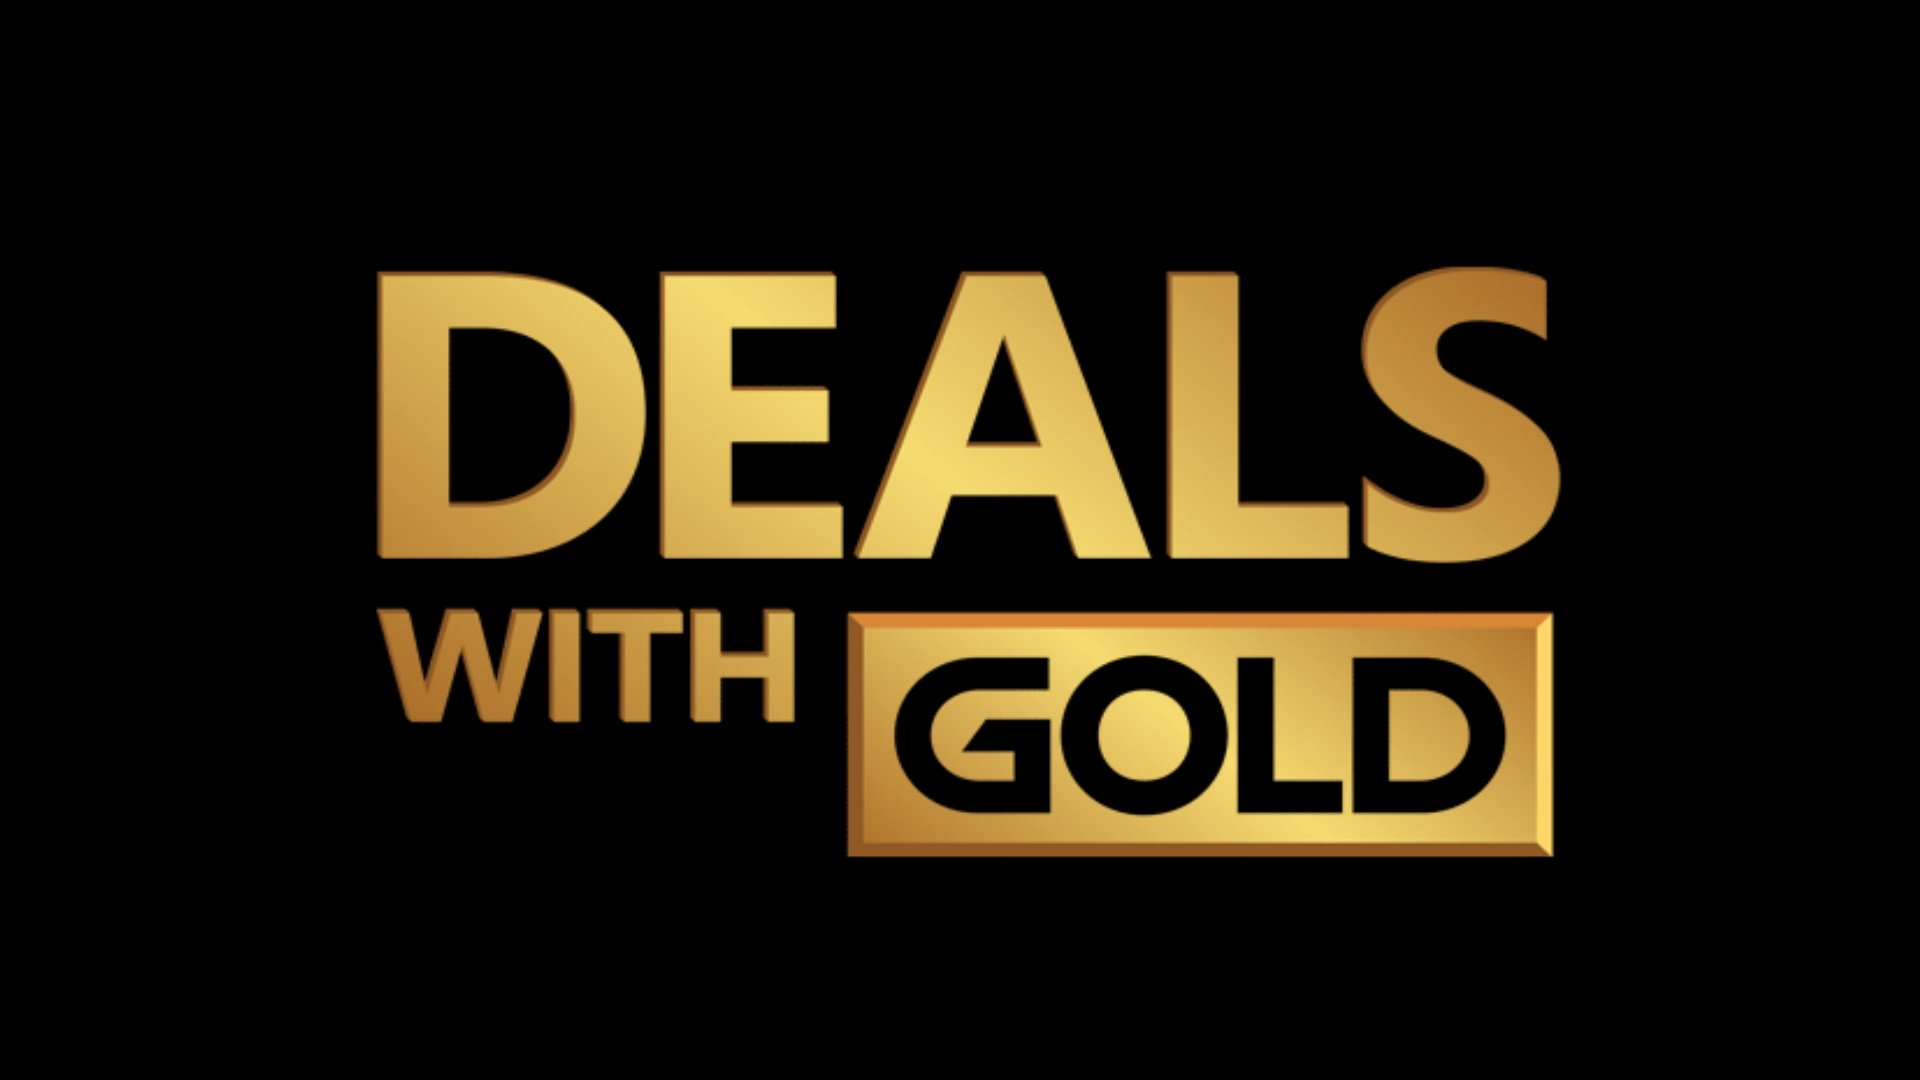 This Week’s Deals with Gold and Spotlight Sale (Week of October 17)